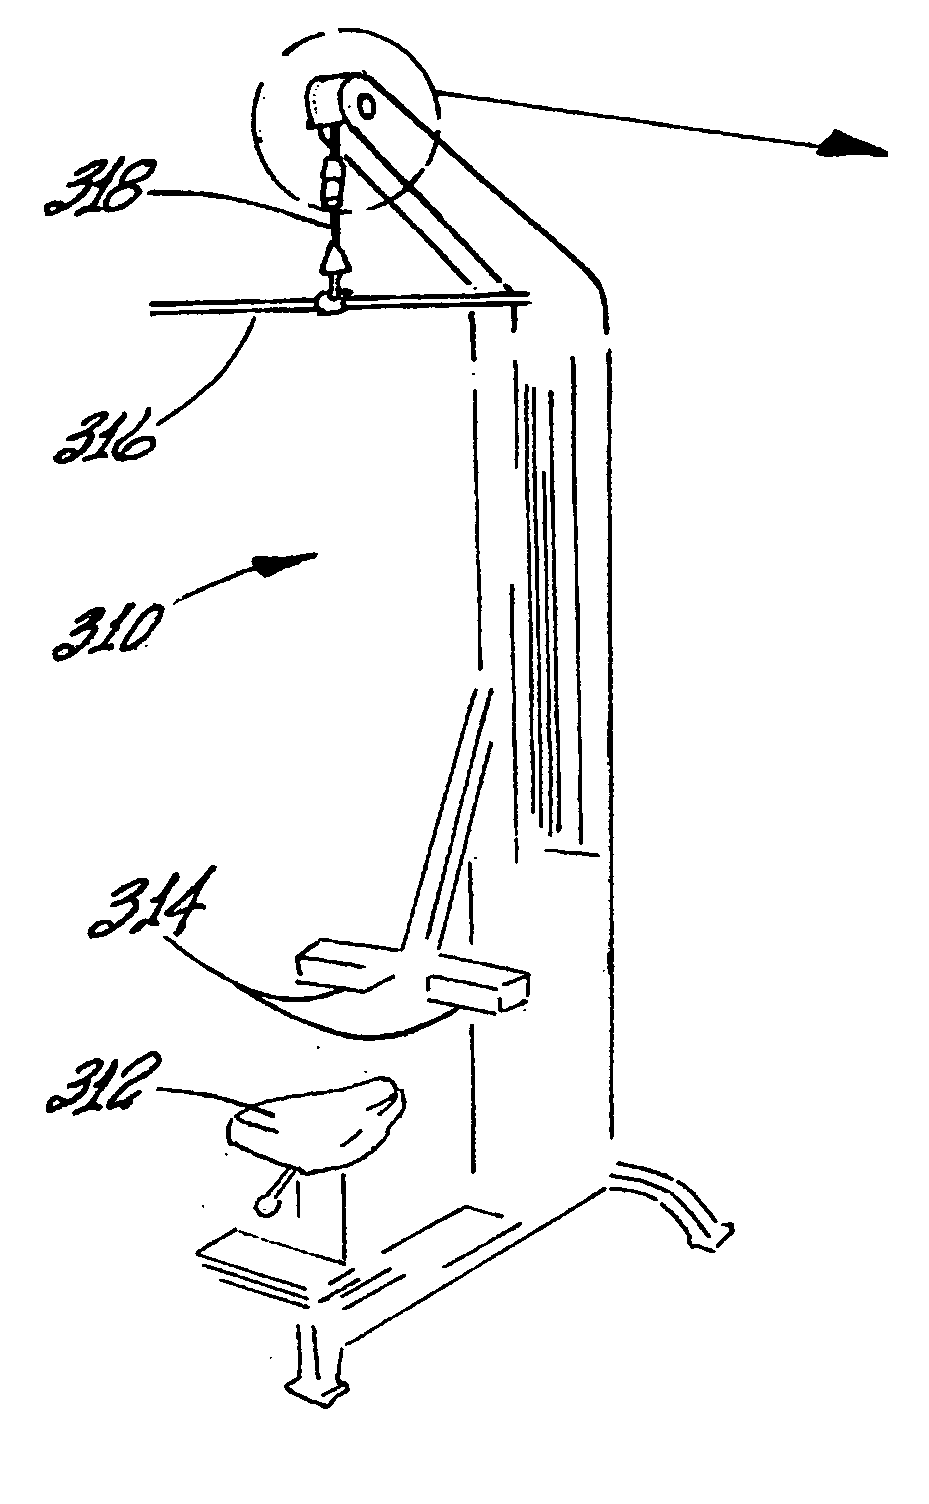 Oscillatory resistance exercise device and method